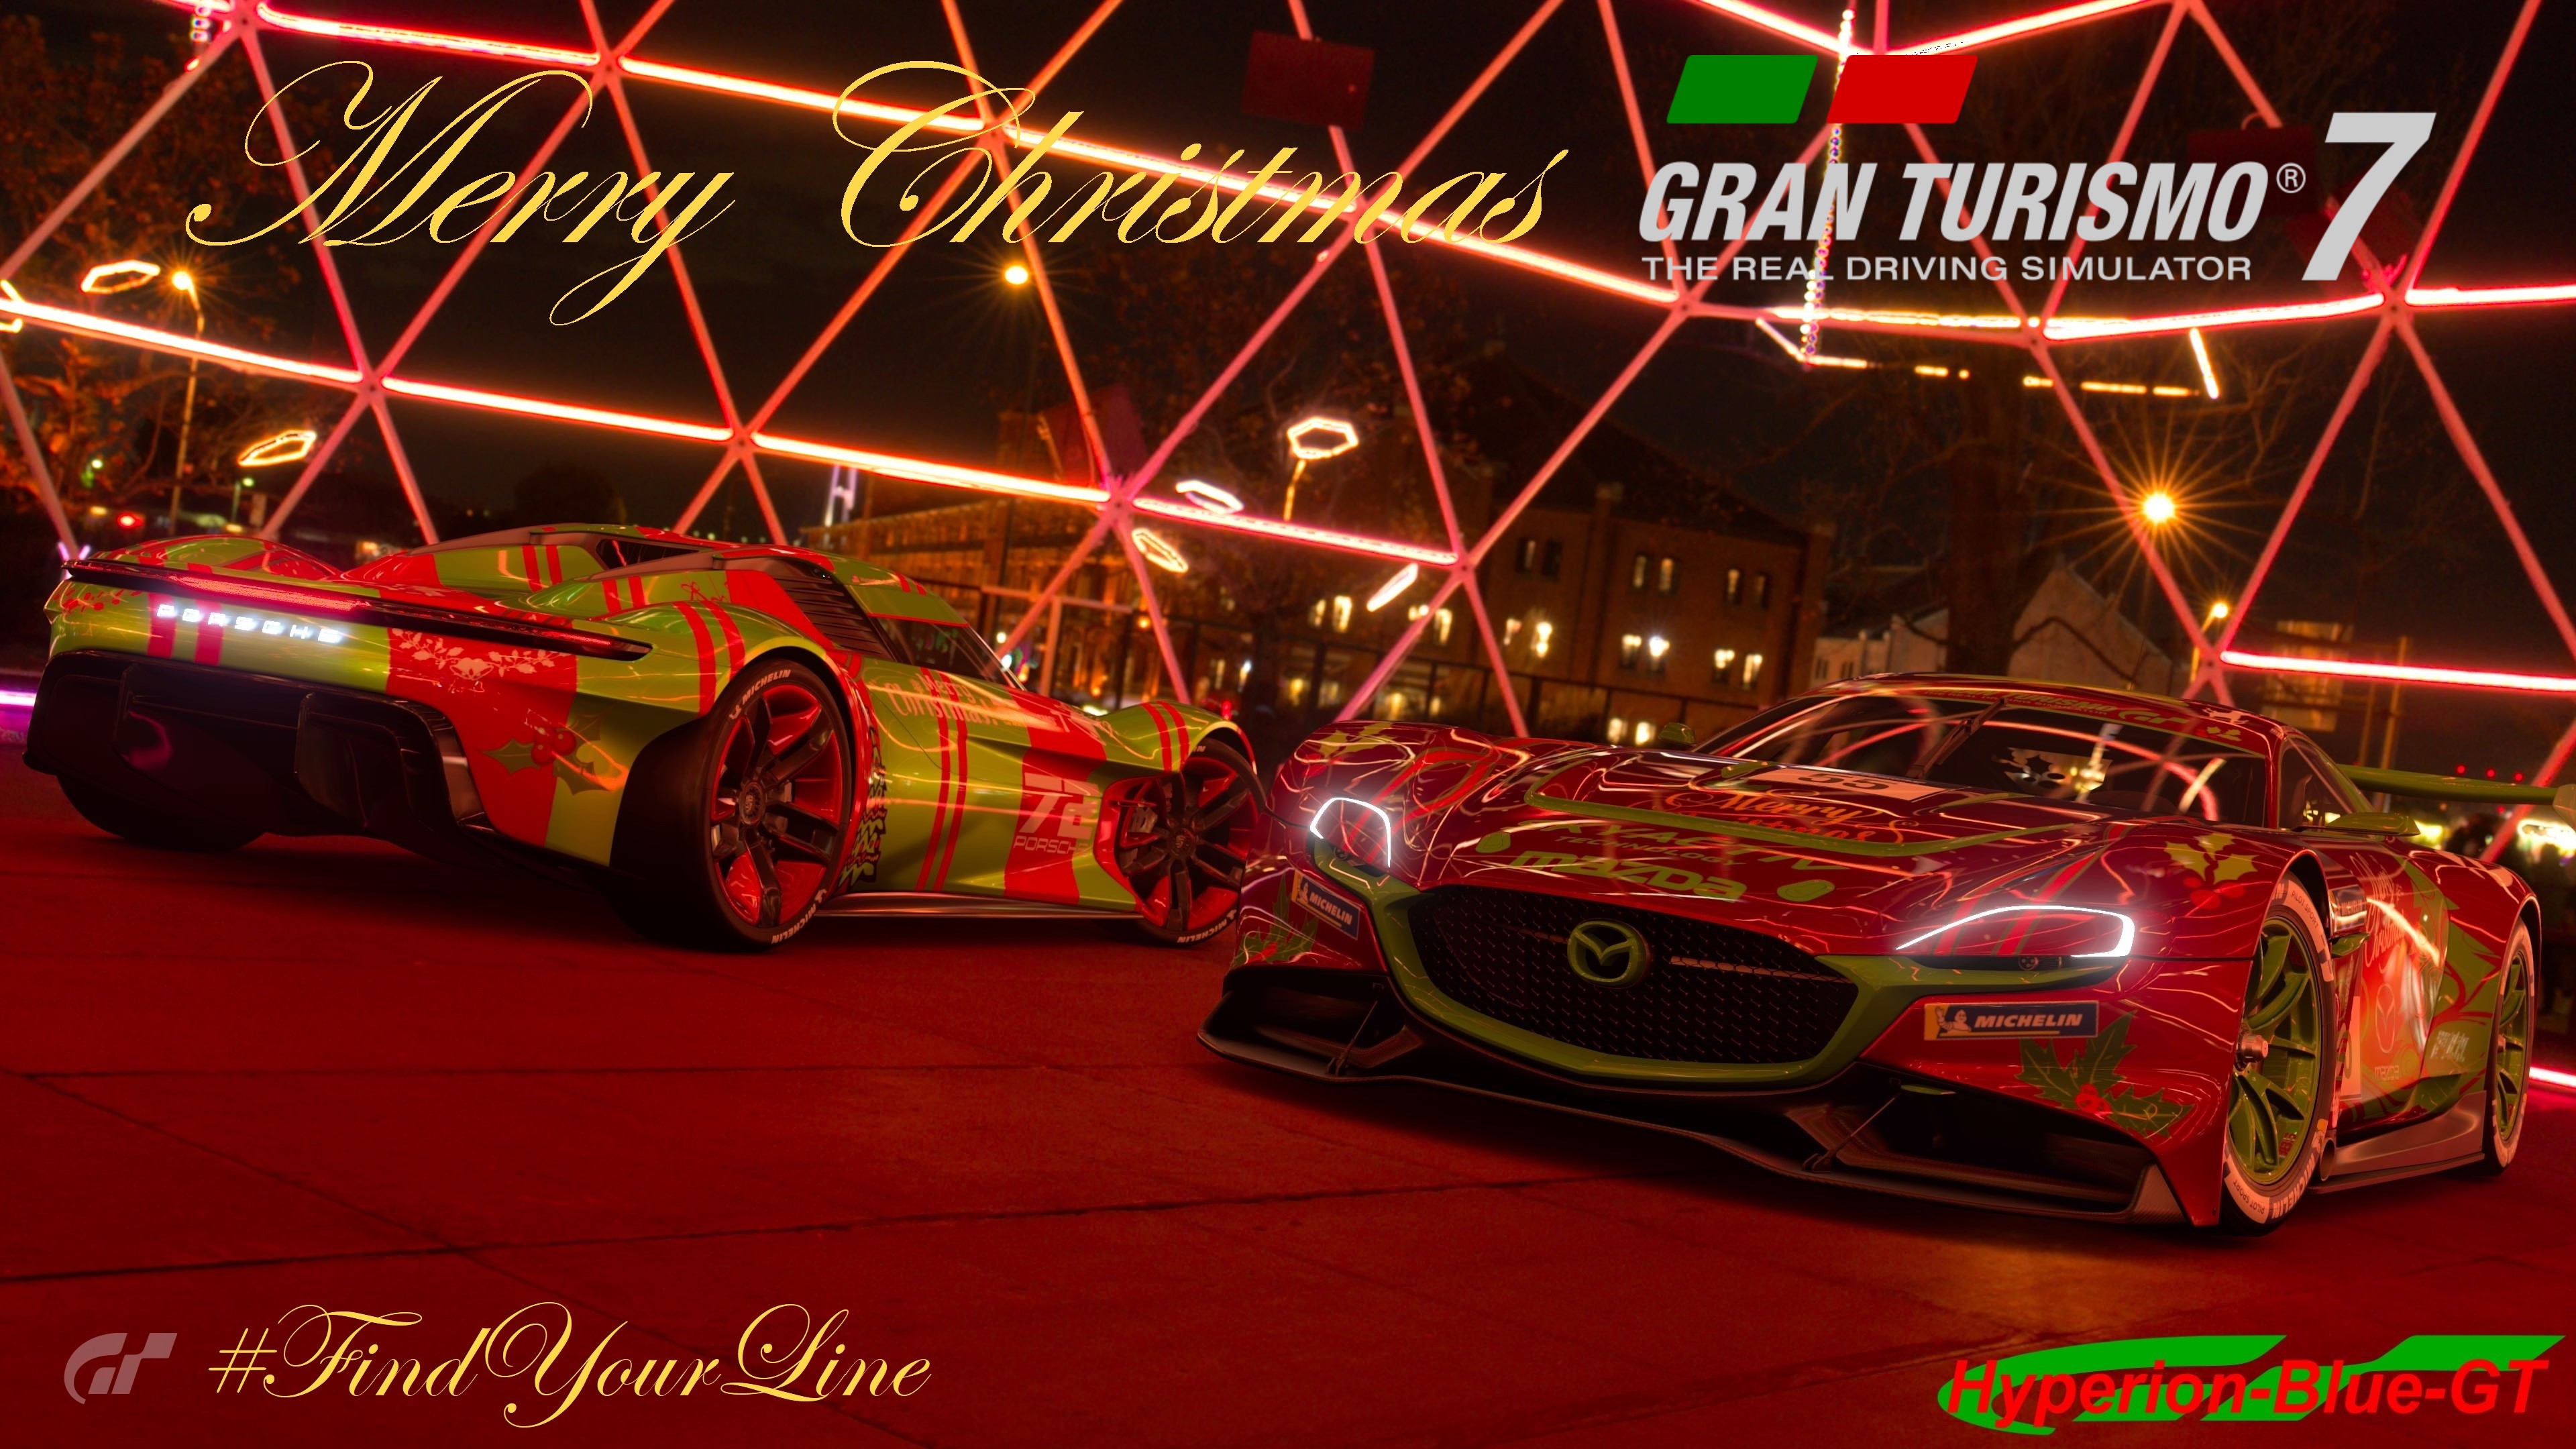 Find Your Line with Gran Turismo 7